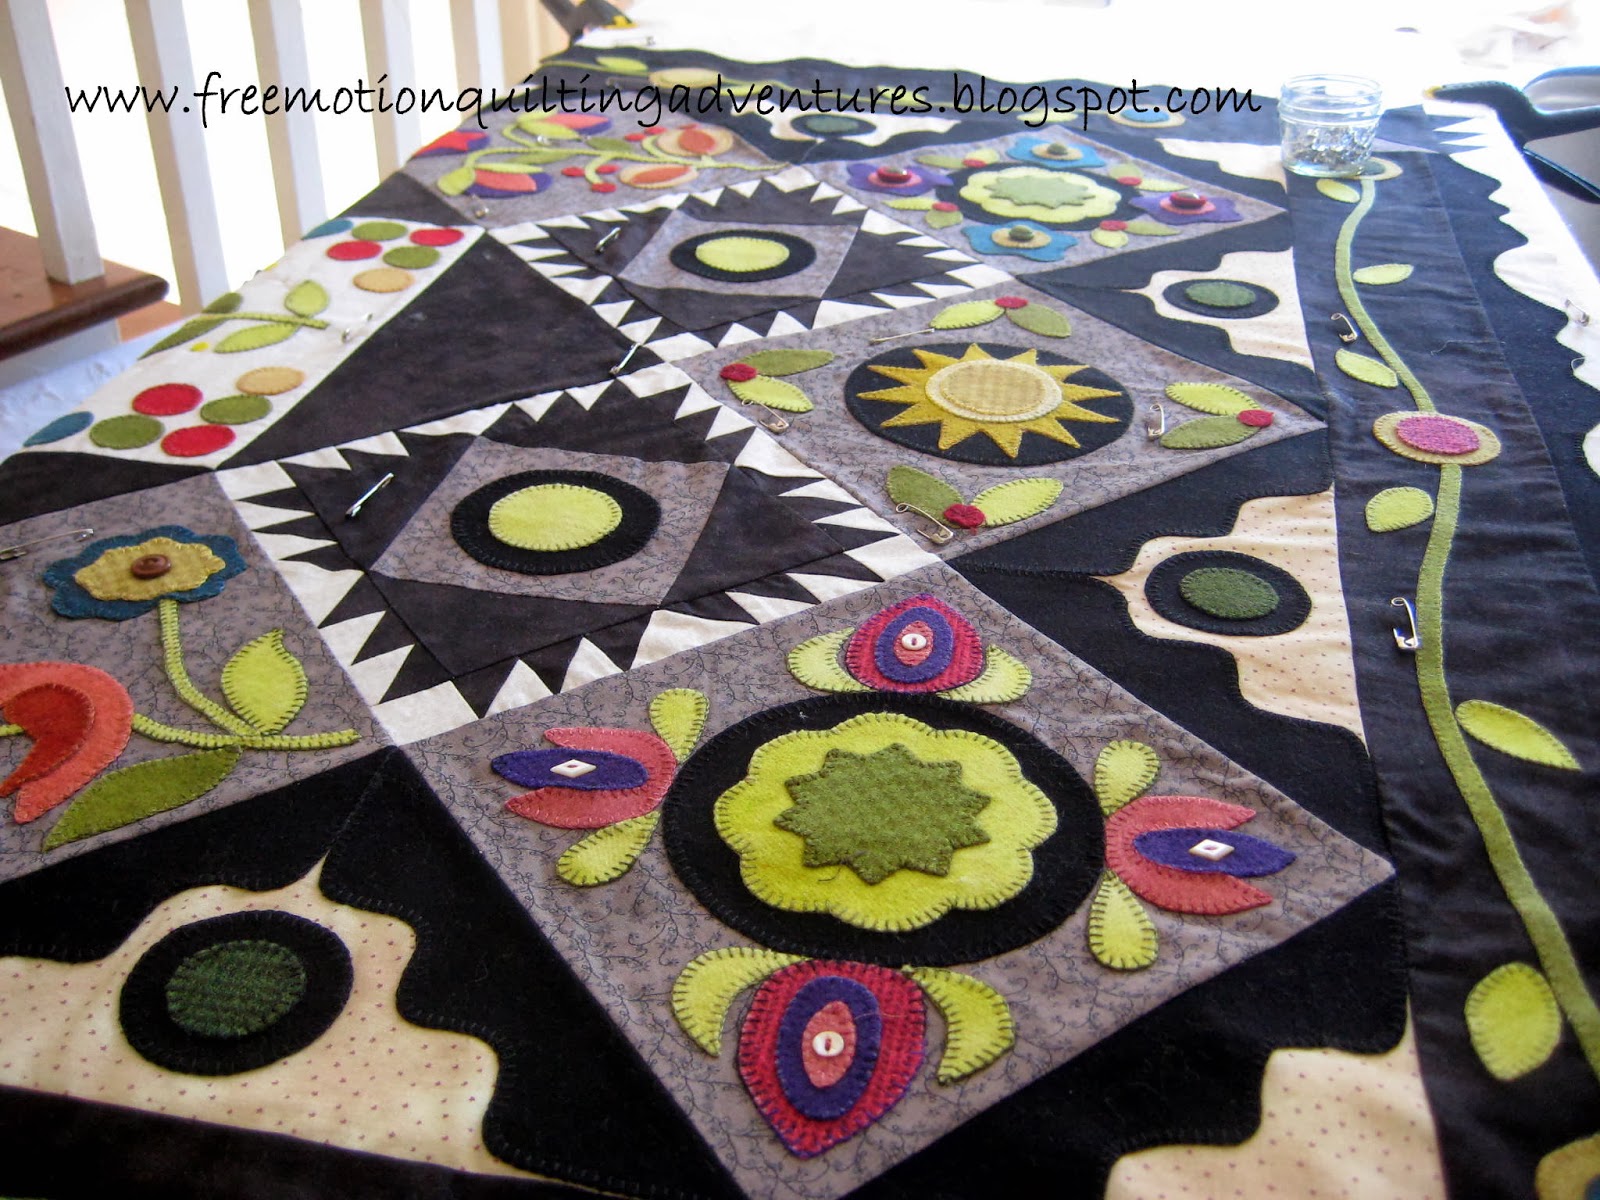 Amy's Free Motion Quilting Adventures: My Gone Quilting Badge